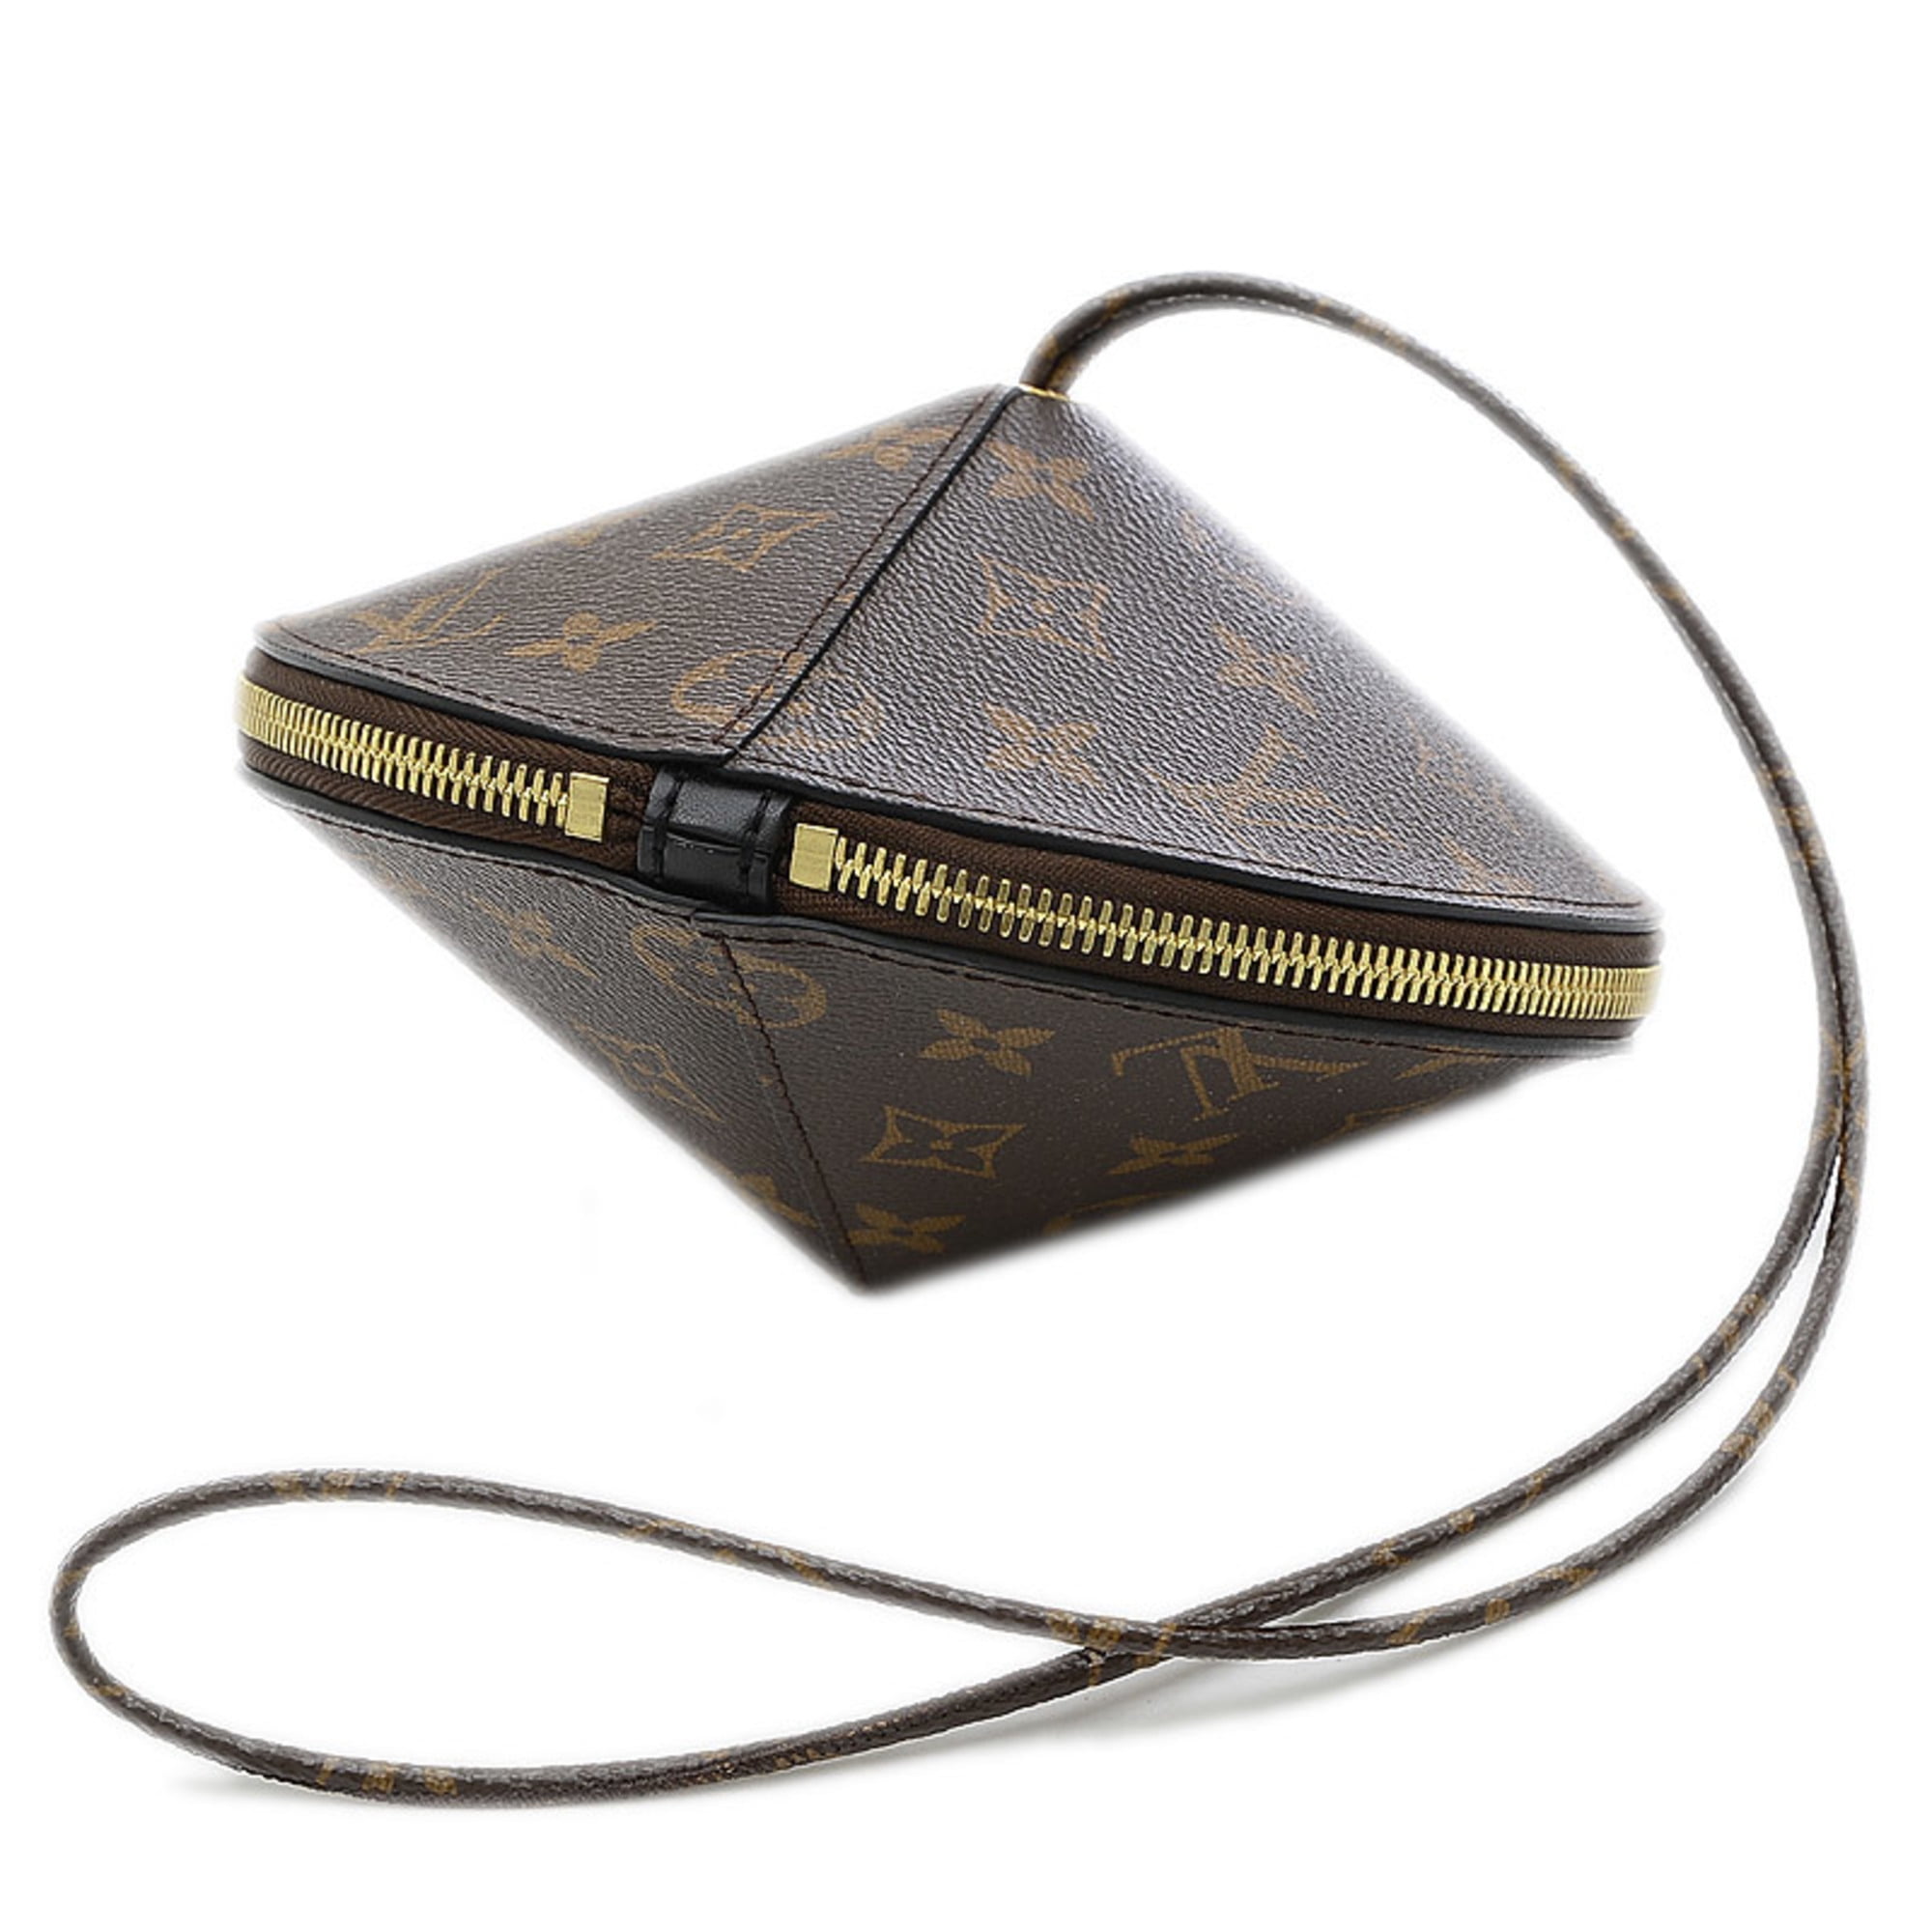 Authenticated Used Louis Vuitton Monogram Tupi Party Bag Pouch M44592 